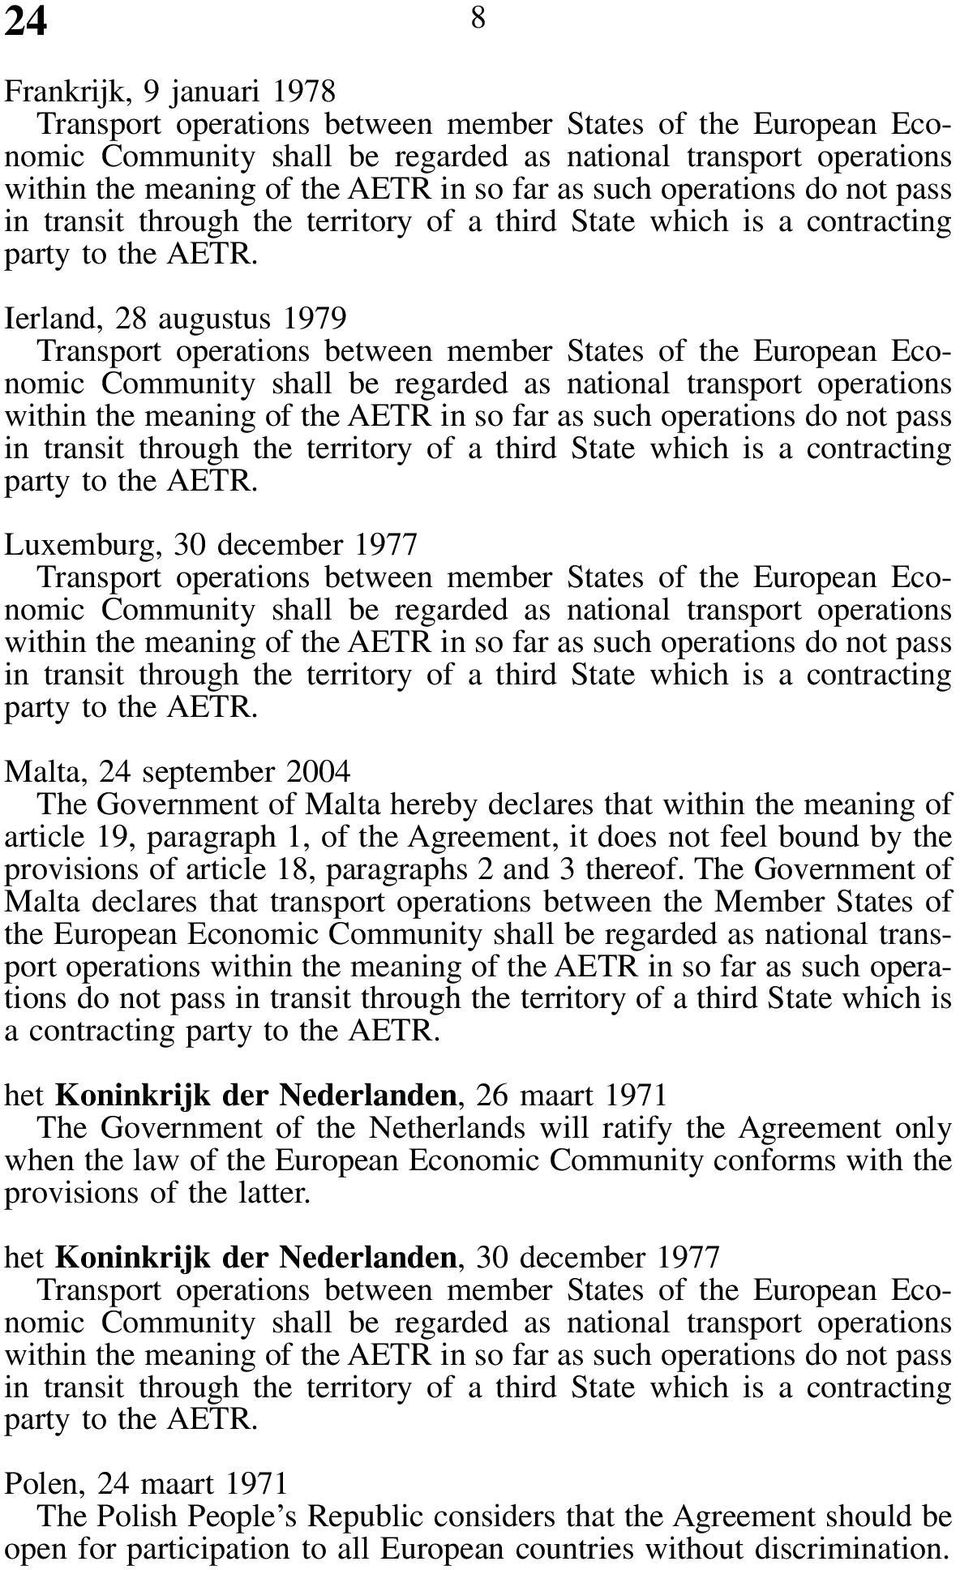 The Government of Malta declares that transport operations between the Member States of the European Economic Community shall be regarded as national transport operations within the meaning of the